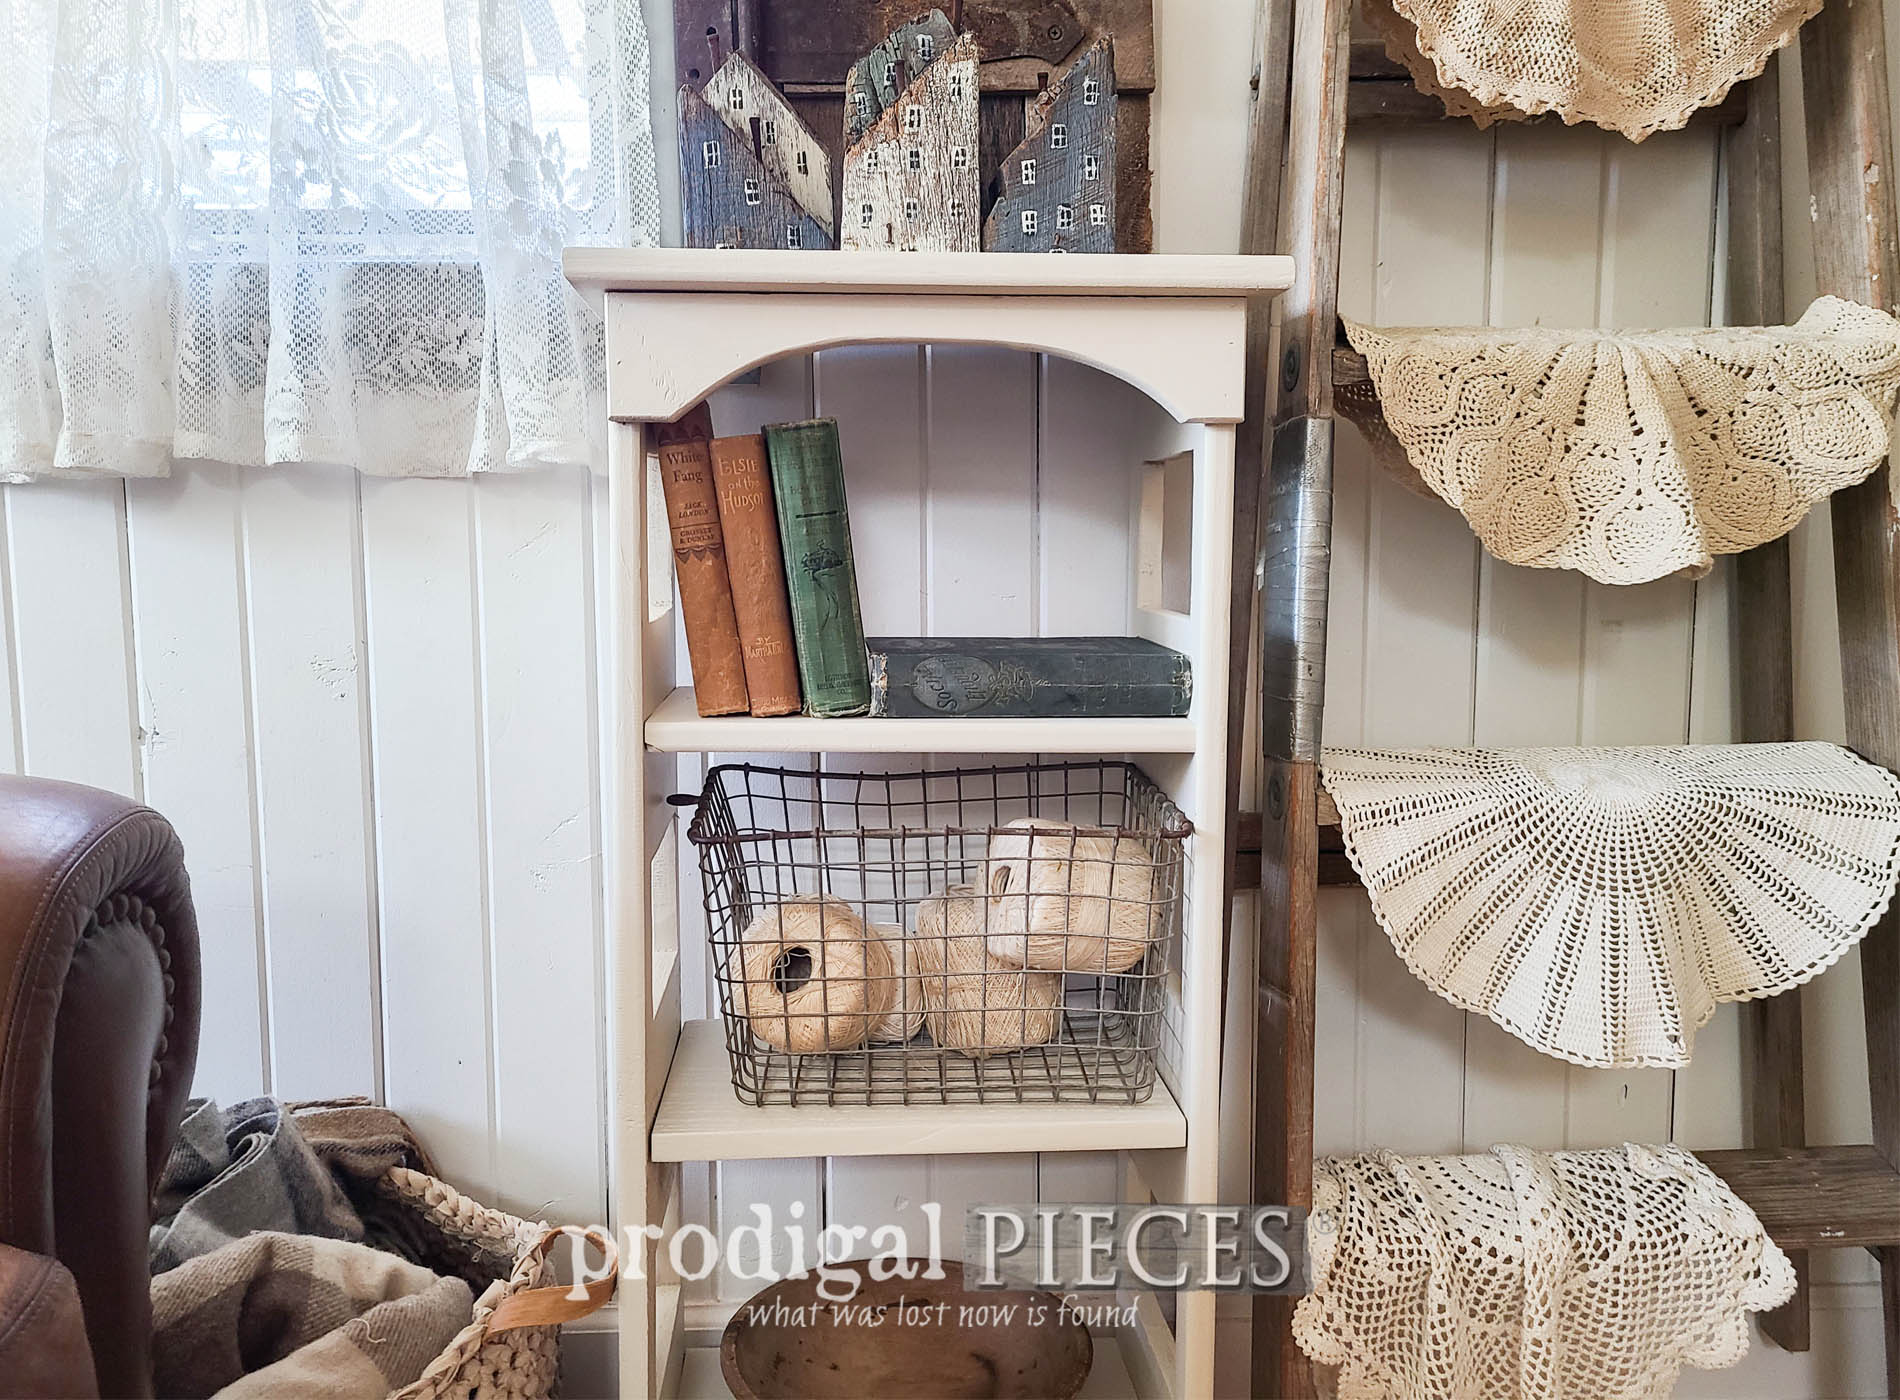 Featured Vintage Bookshelf Found Curbside Gets New Look by Larissa of Prodigal Pieces | prodigalpieces.com #prodigalpieces #diy #upcycled